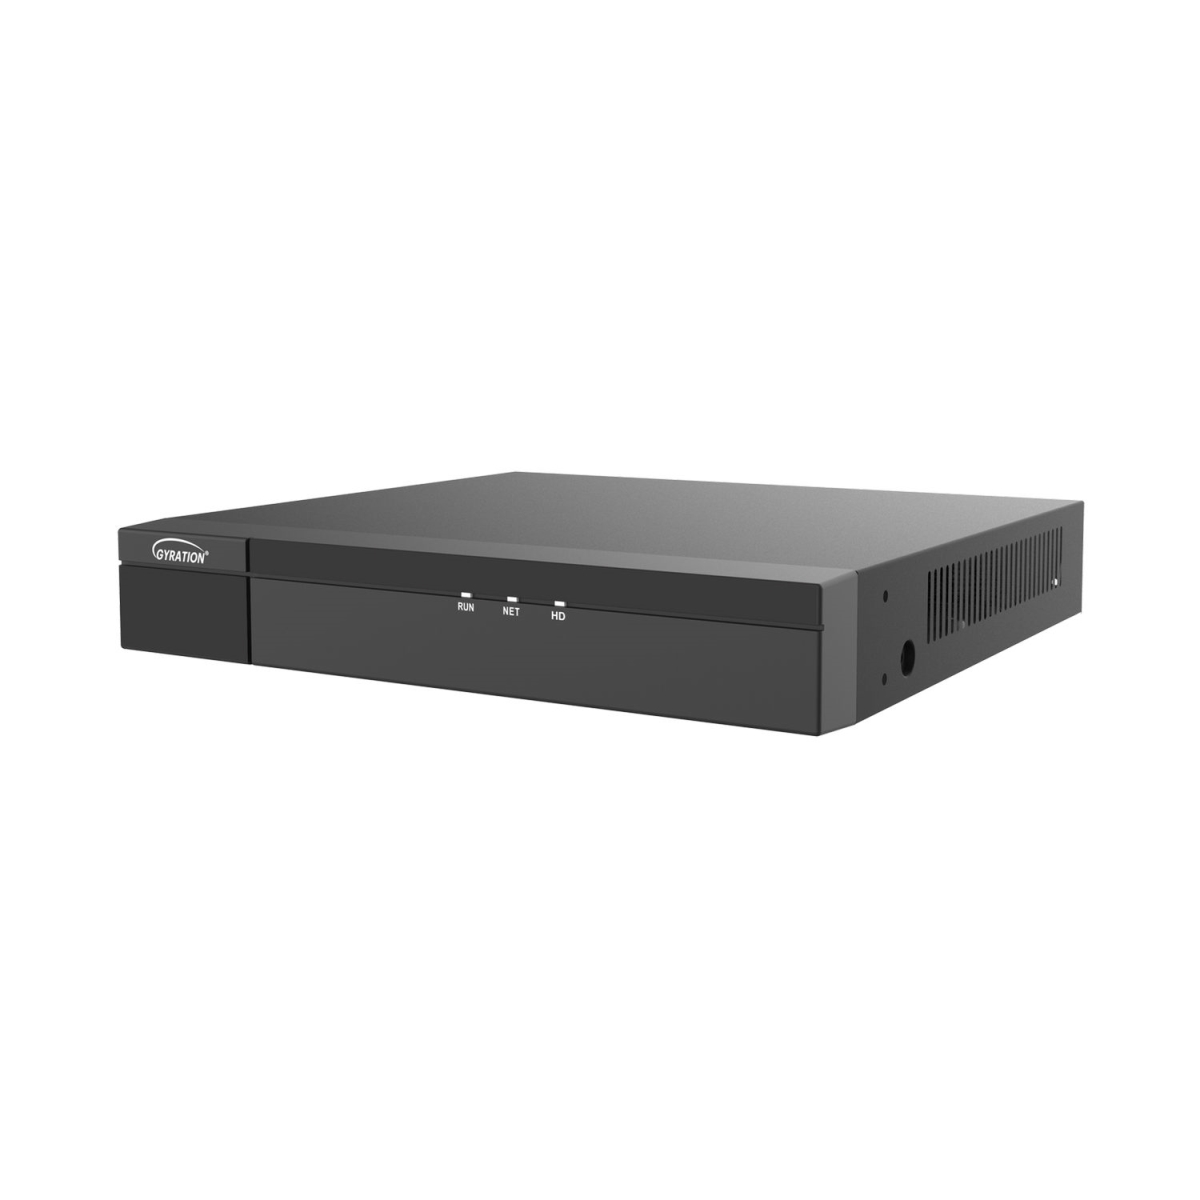 Picture of Gyration CYBERVIEWN4 4 Channel NVR H.265 4K No HDD PoE 1 SATA Interface Video Recorder